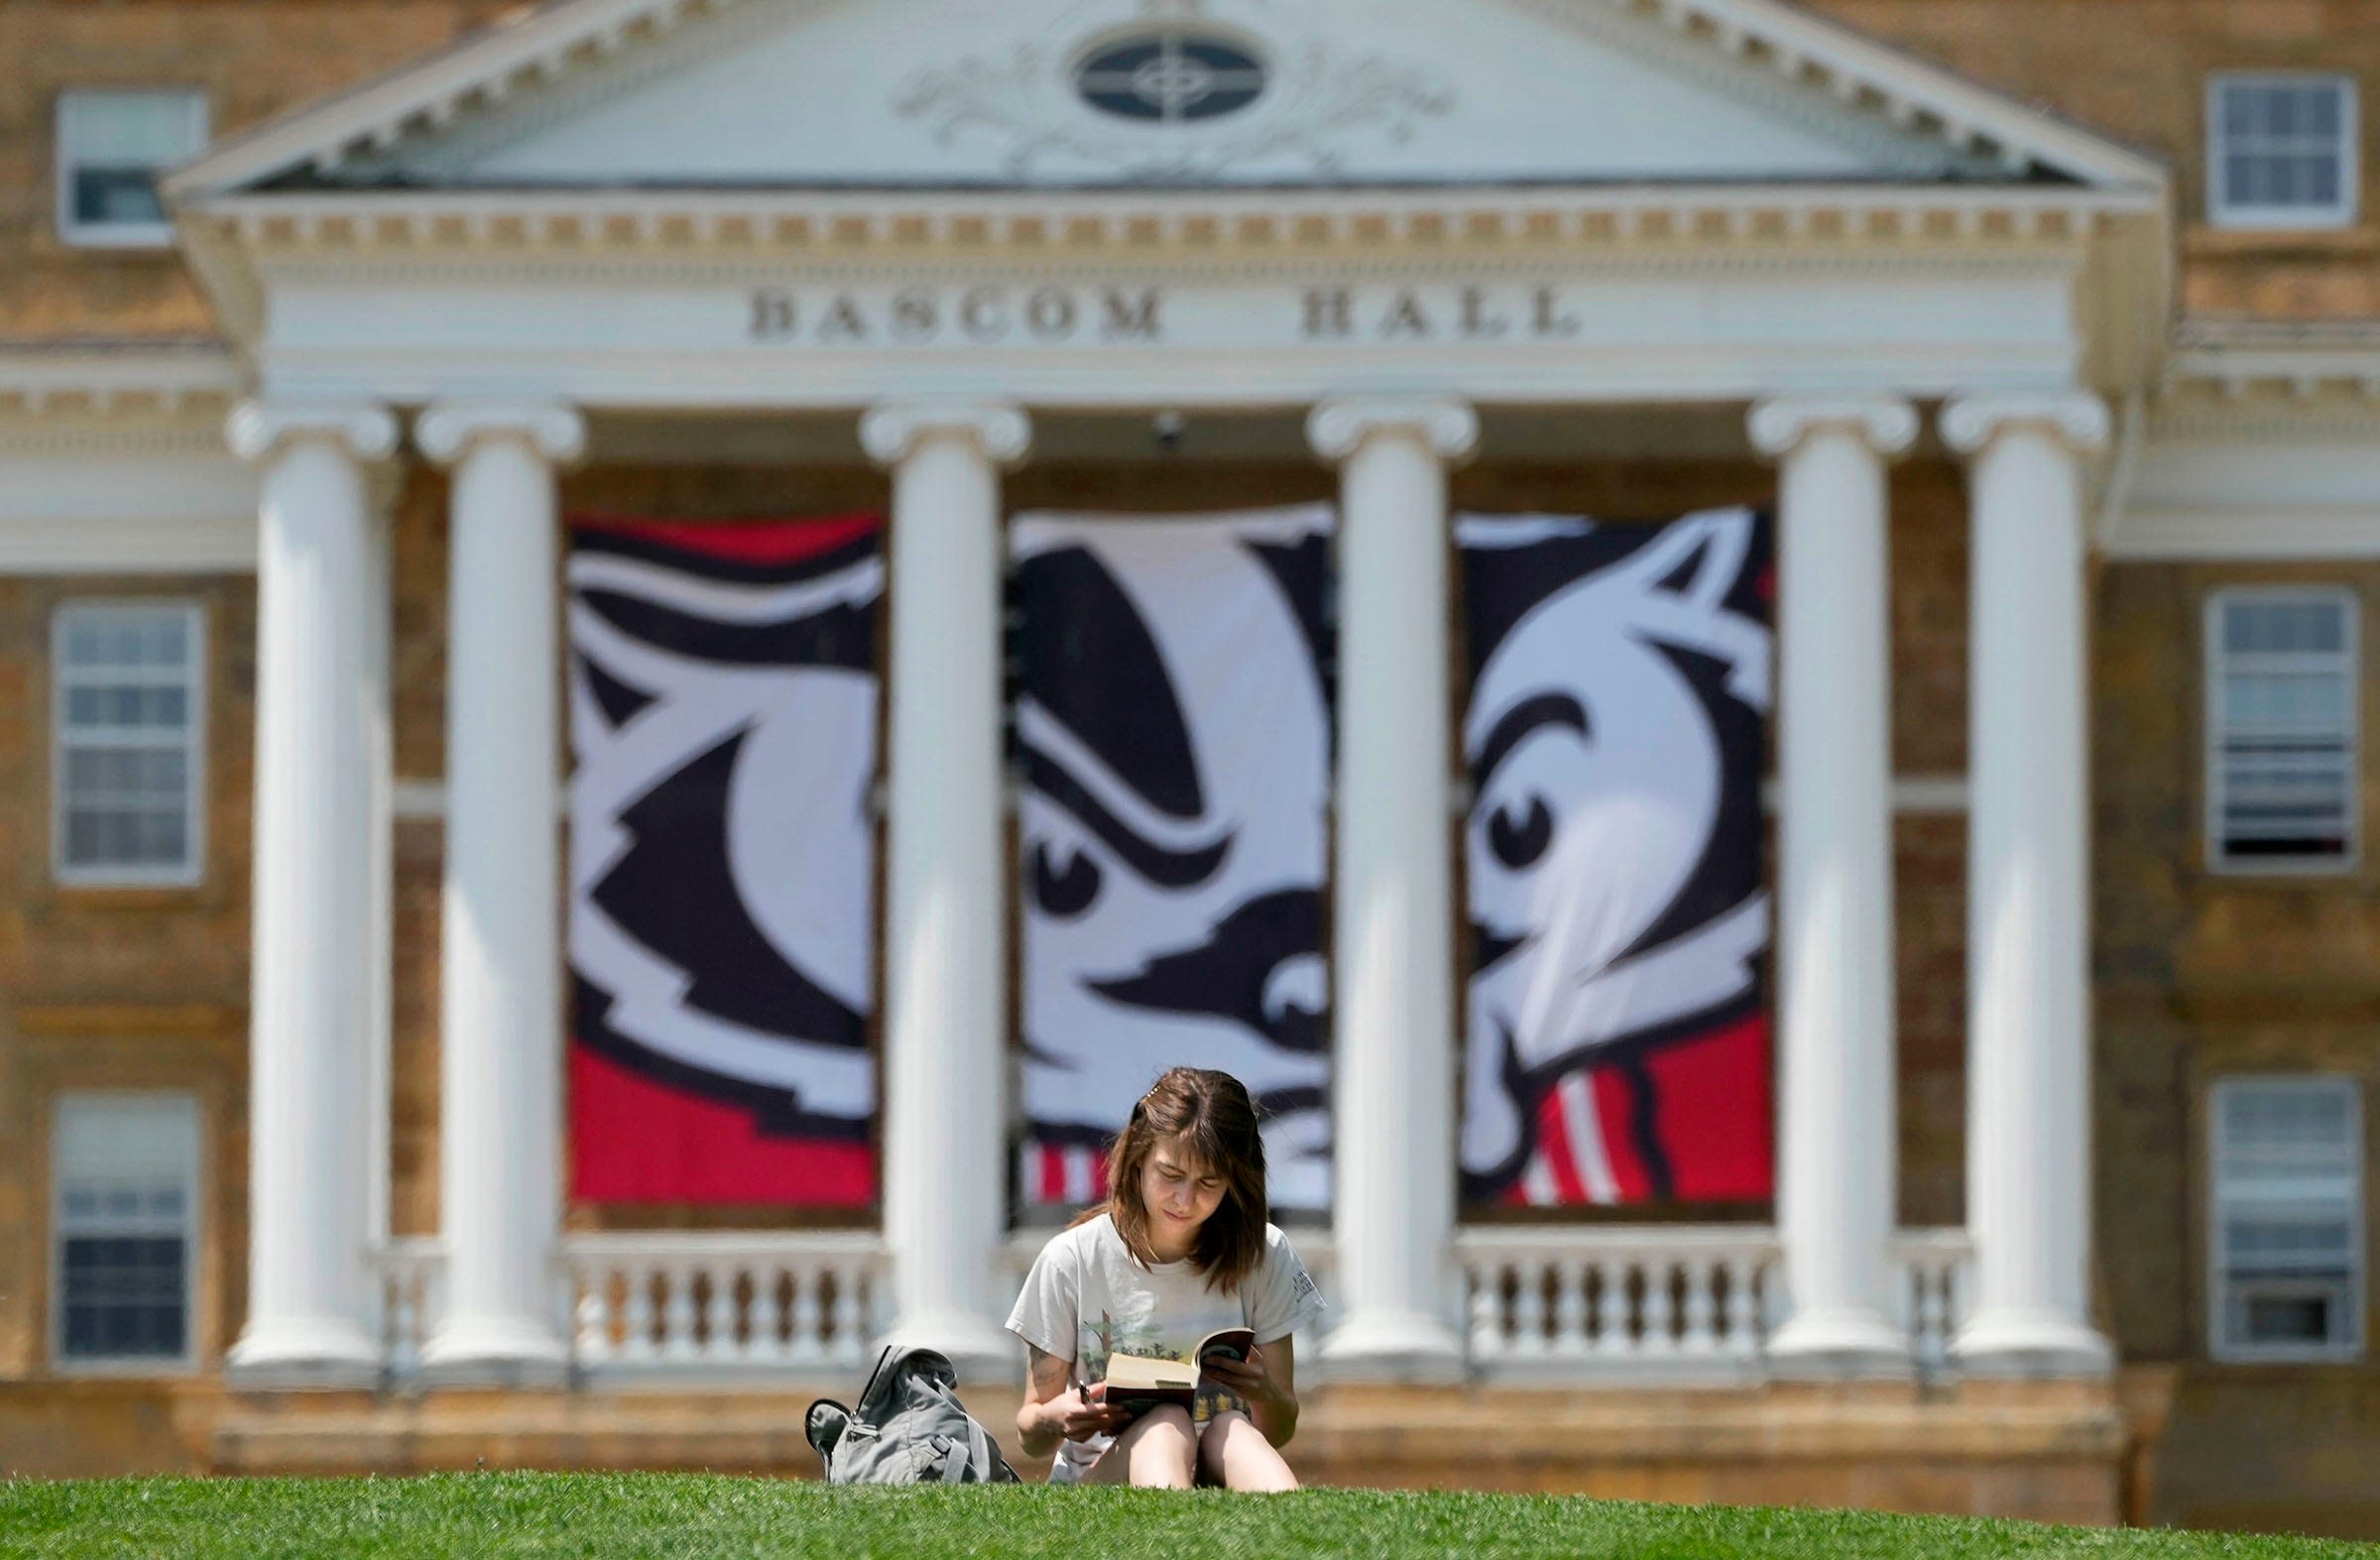 Does Wisconsin have any Ivy League schools? It does now, according to Forbes